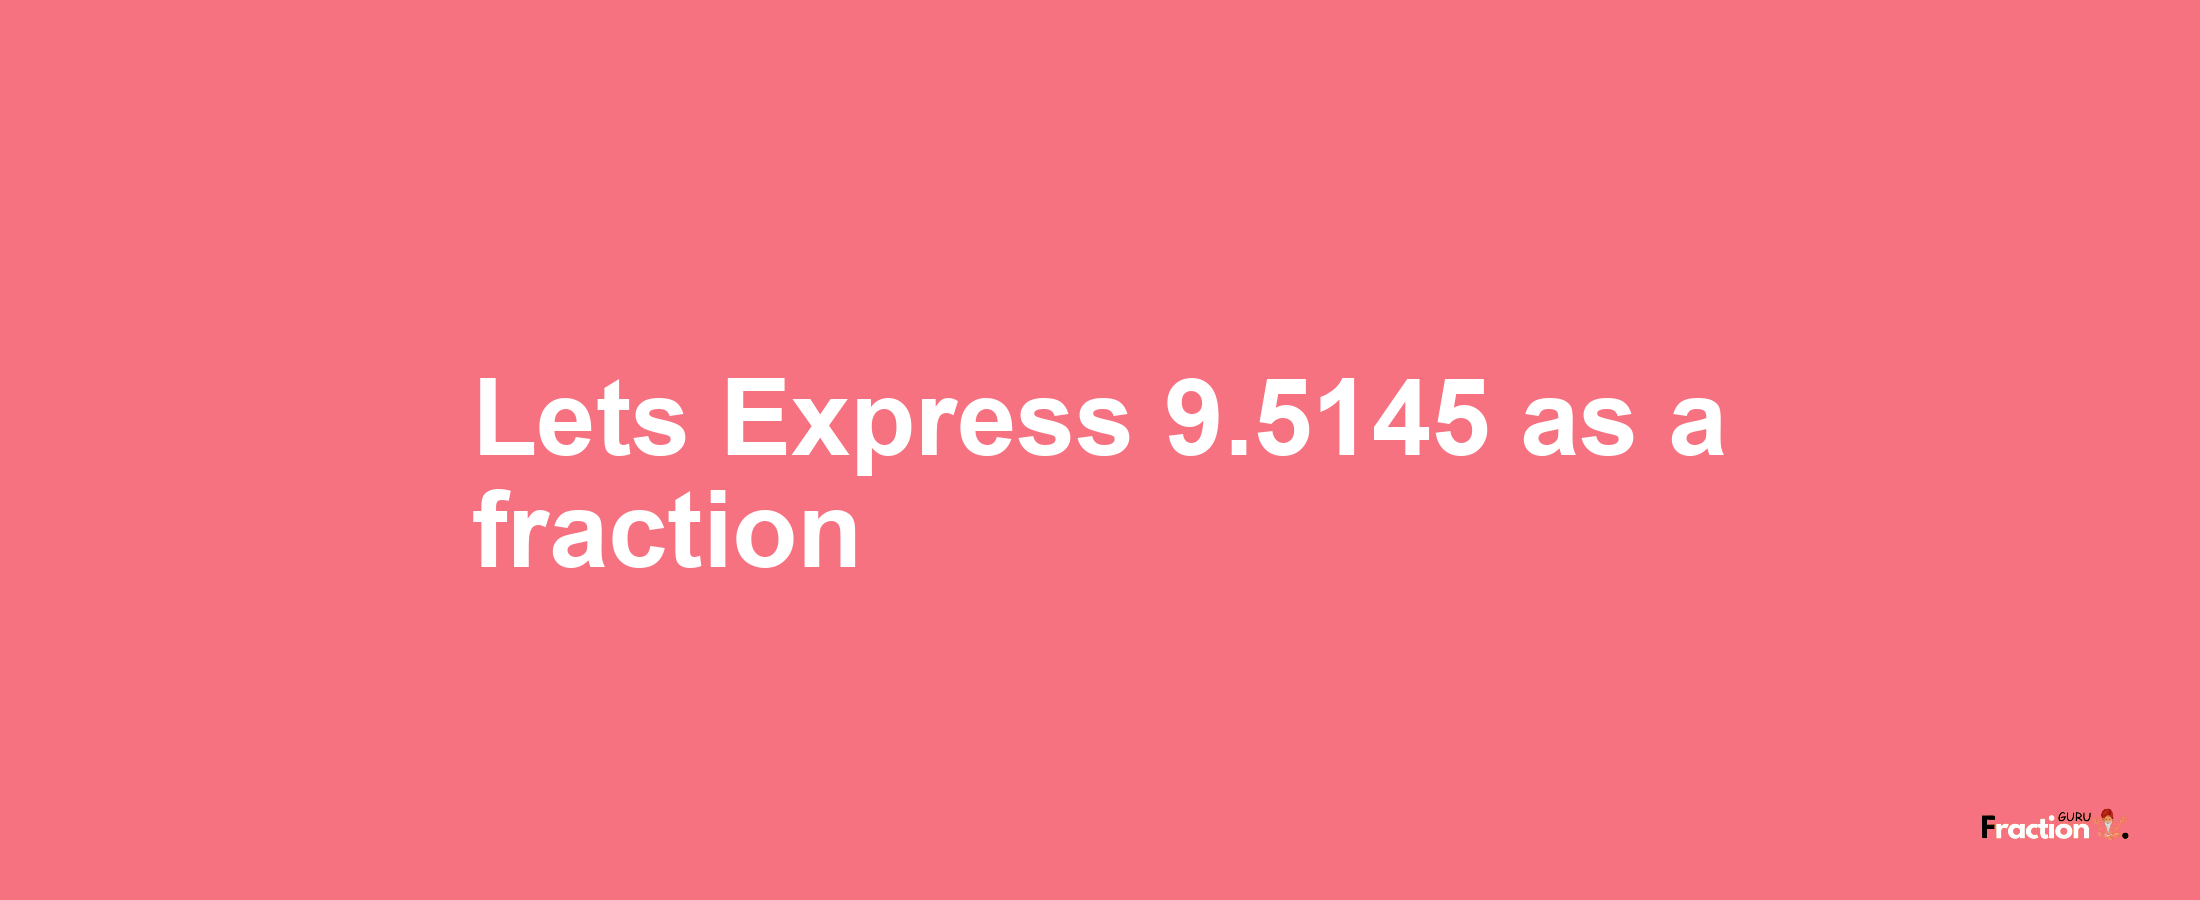 Lets Express 9.5145 as afraction